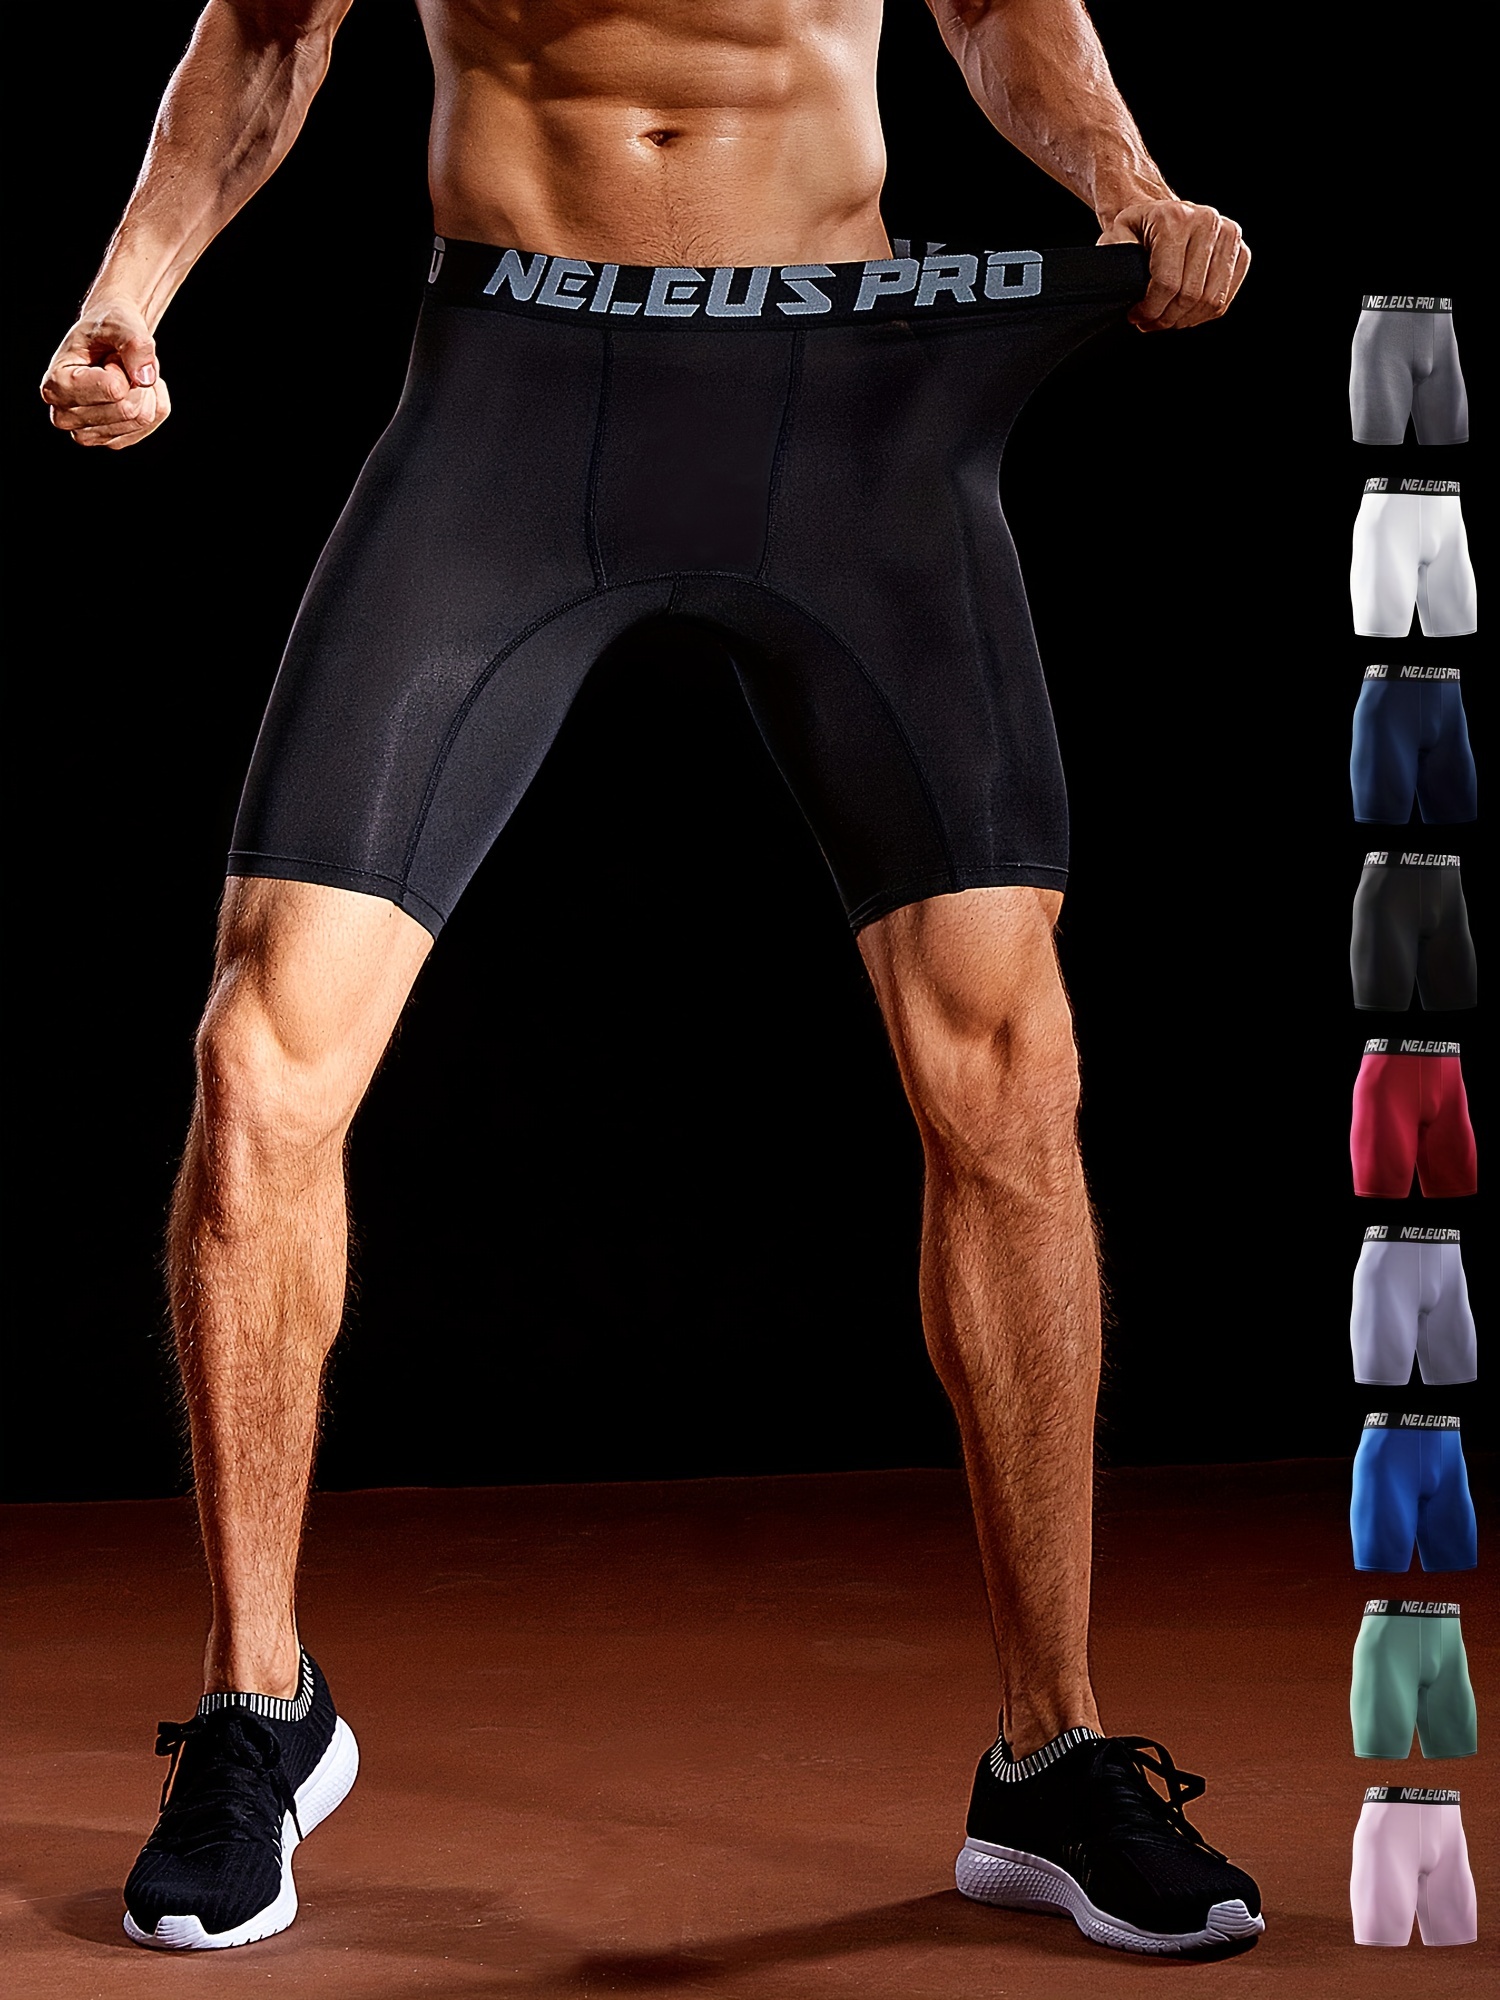 Mens Quick Drying Compression Shorts Casual Breathable Elastic Shorts  Basketball Football Running Marathon, Find Great Deals